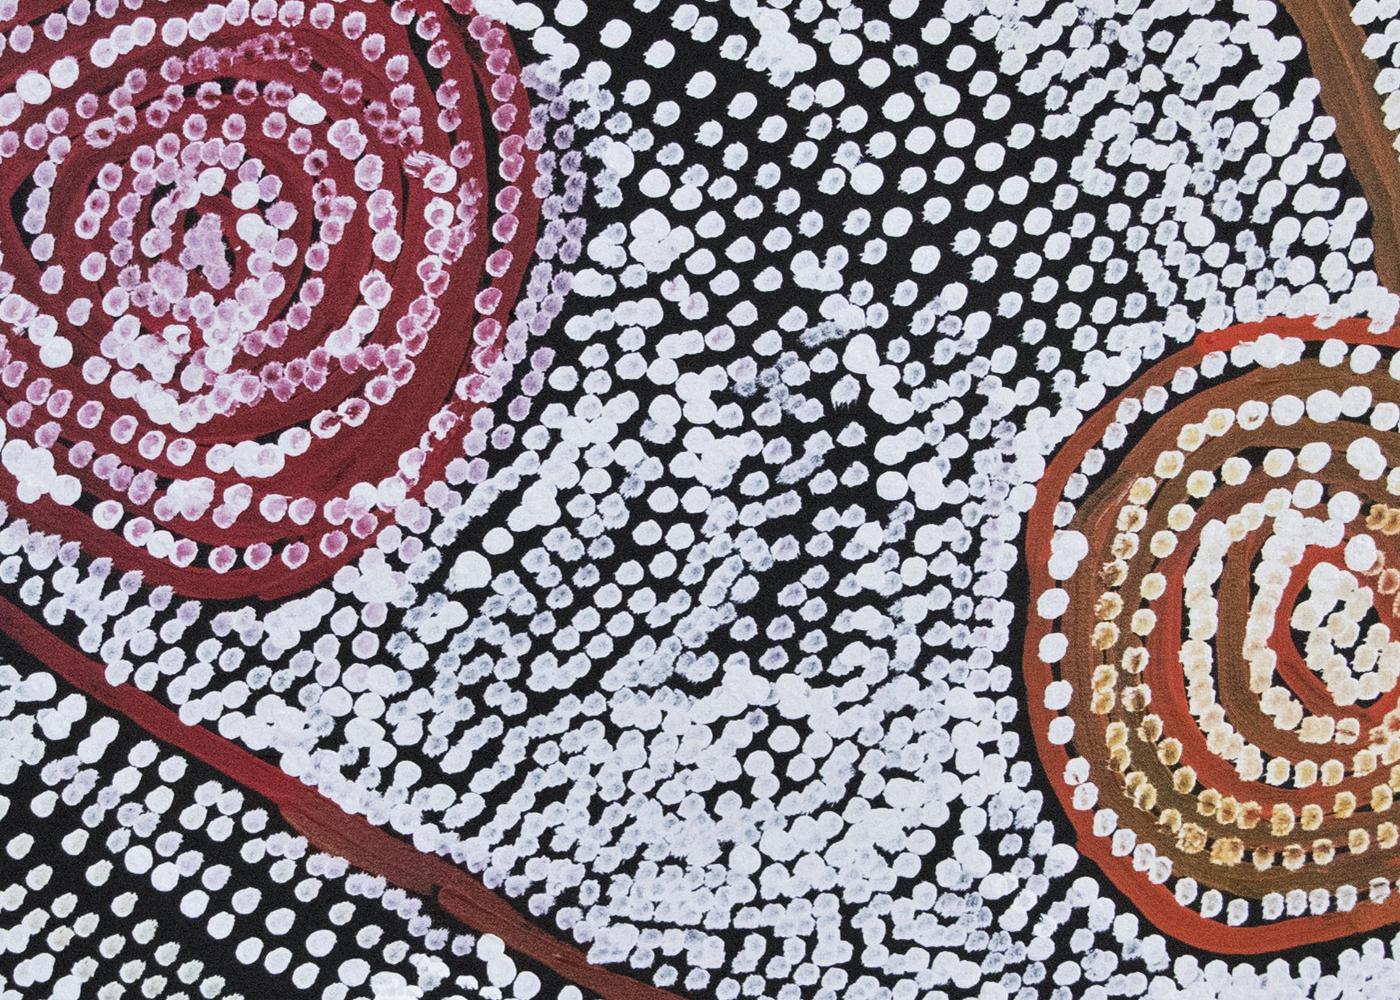 Nyarapayi Giles is an Aboriginal artist at the remote Western Australia art center, Tjarlirliri. She is considered to be one of the most highly collectible living artists and is best known for her mesmerizing concentric circles that mimic the